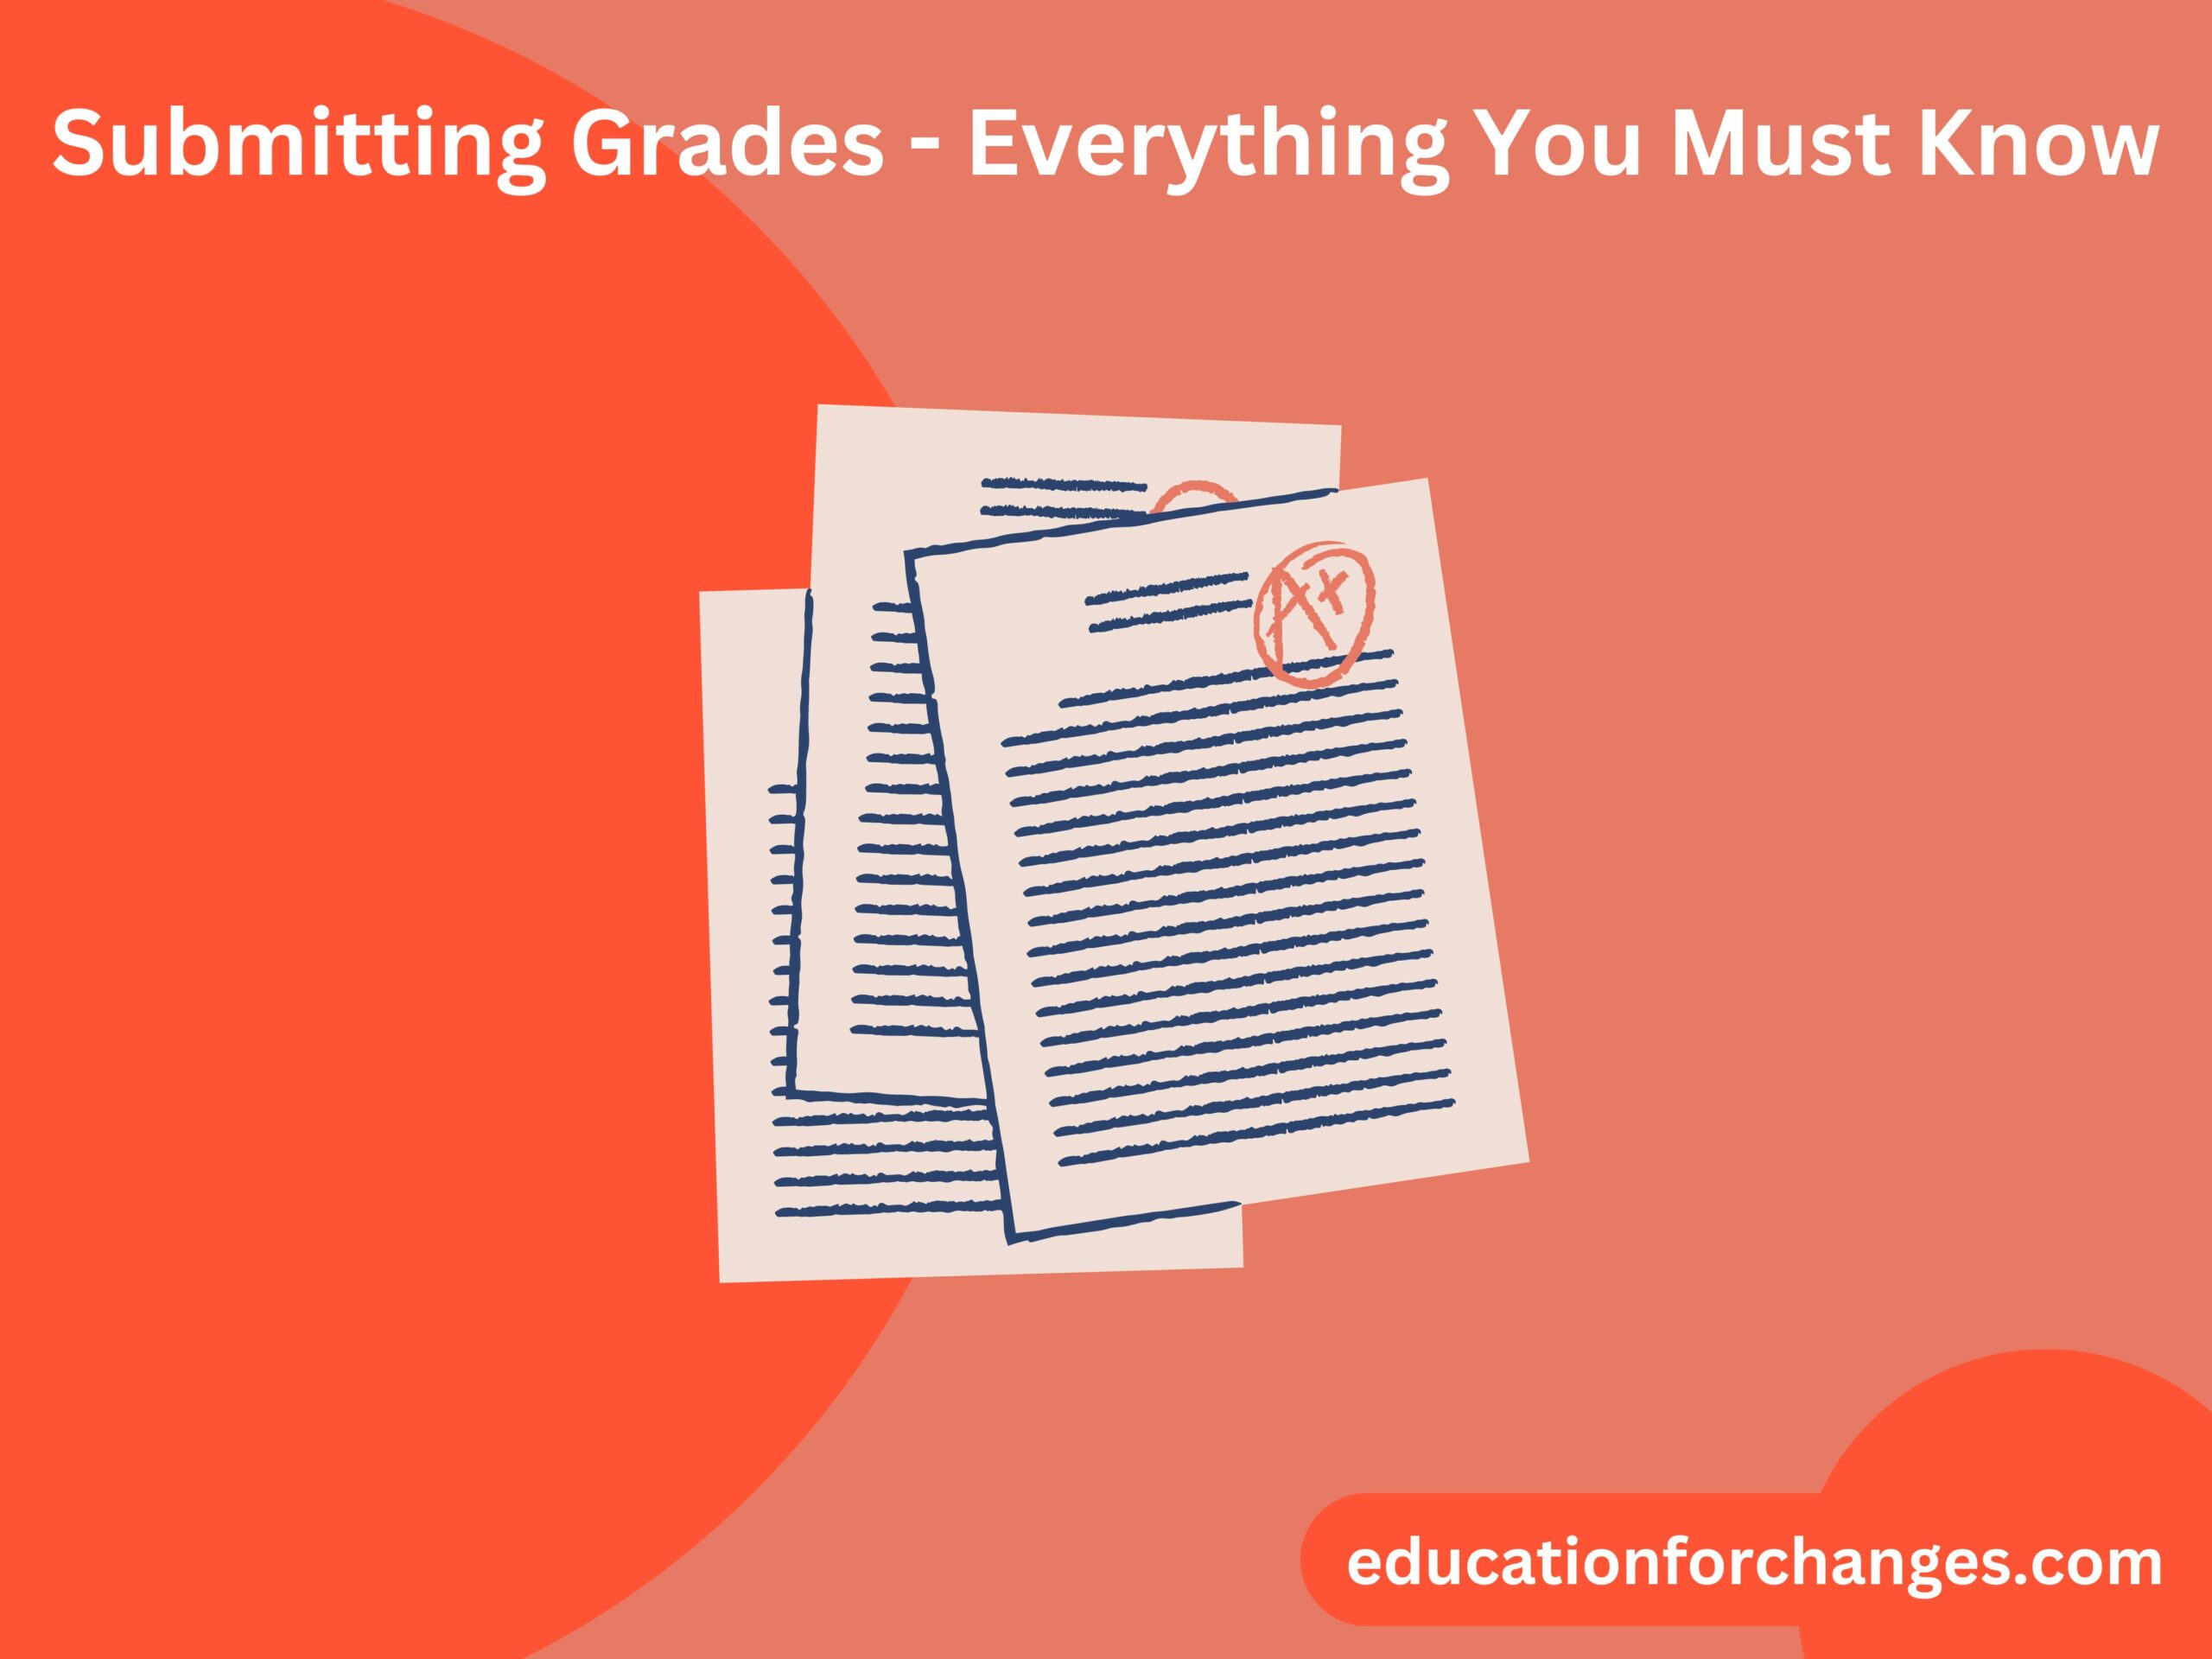 Submitting Grades - Everything You Must Know